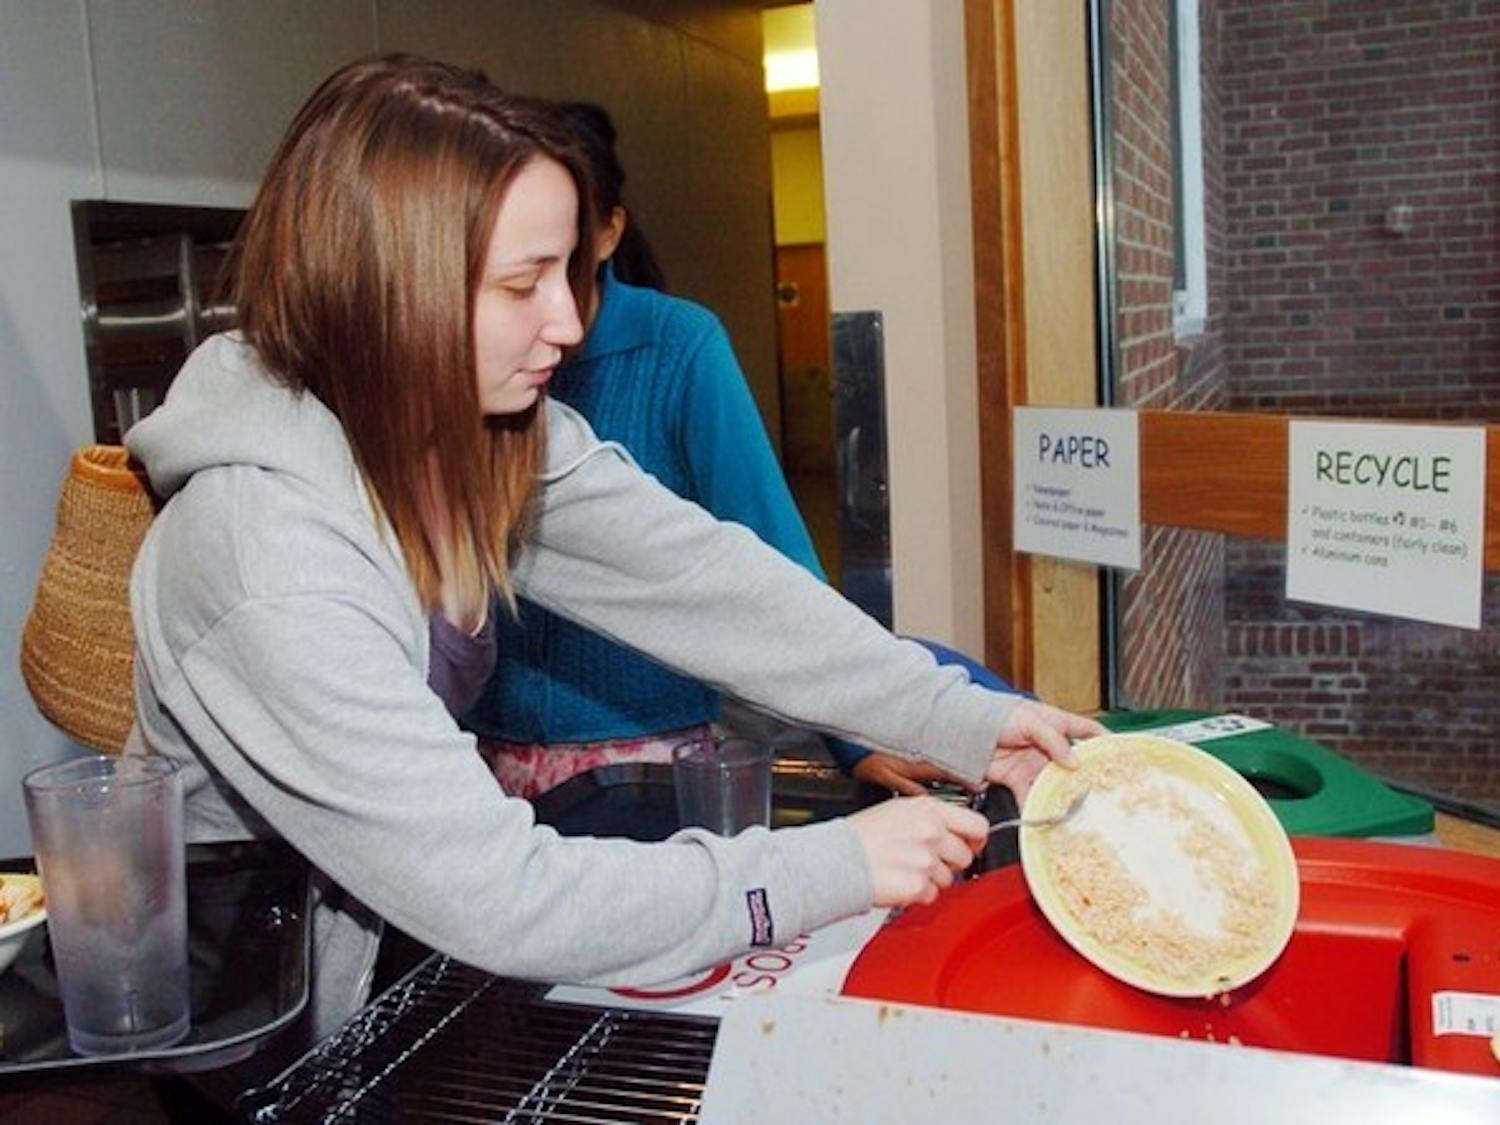 Natalie Spaccarelli '07 contributes to the Home Plate no-waste initiative by scraping her plate clean and following the composting guidelines.